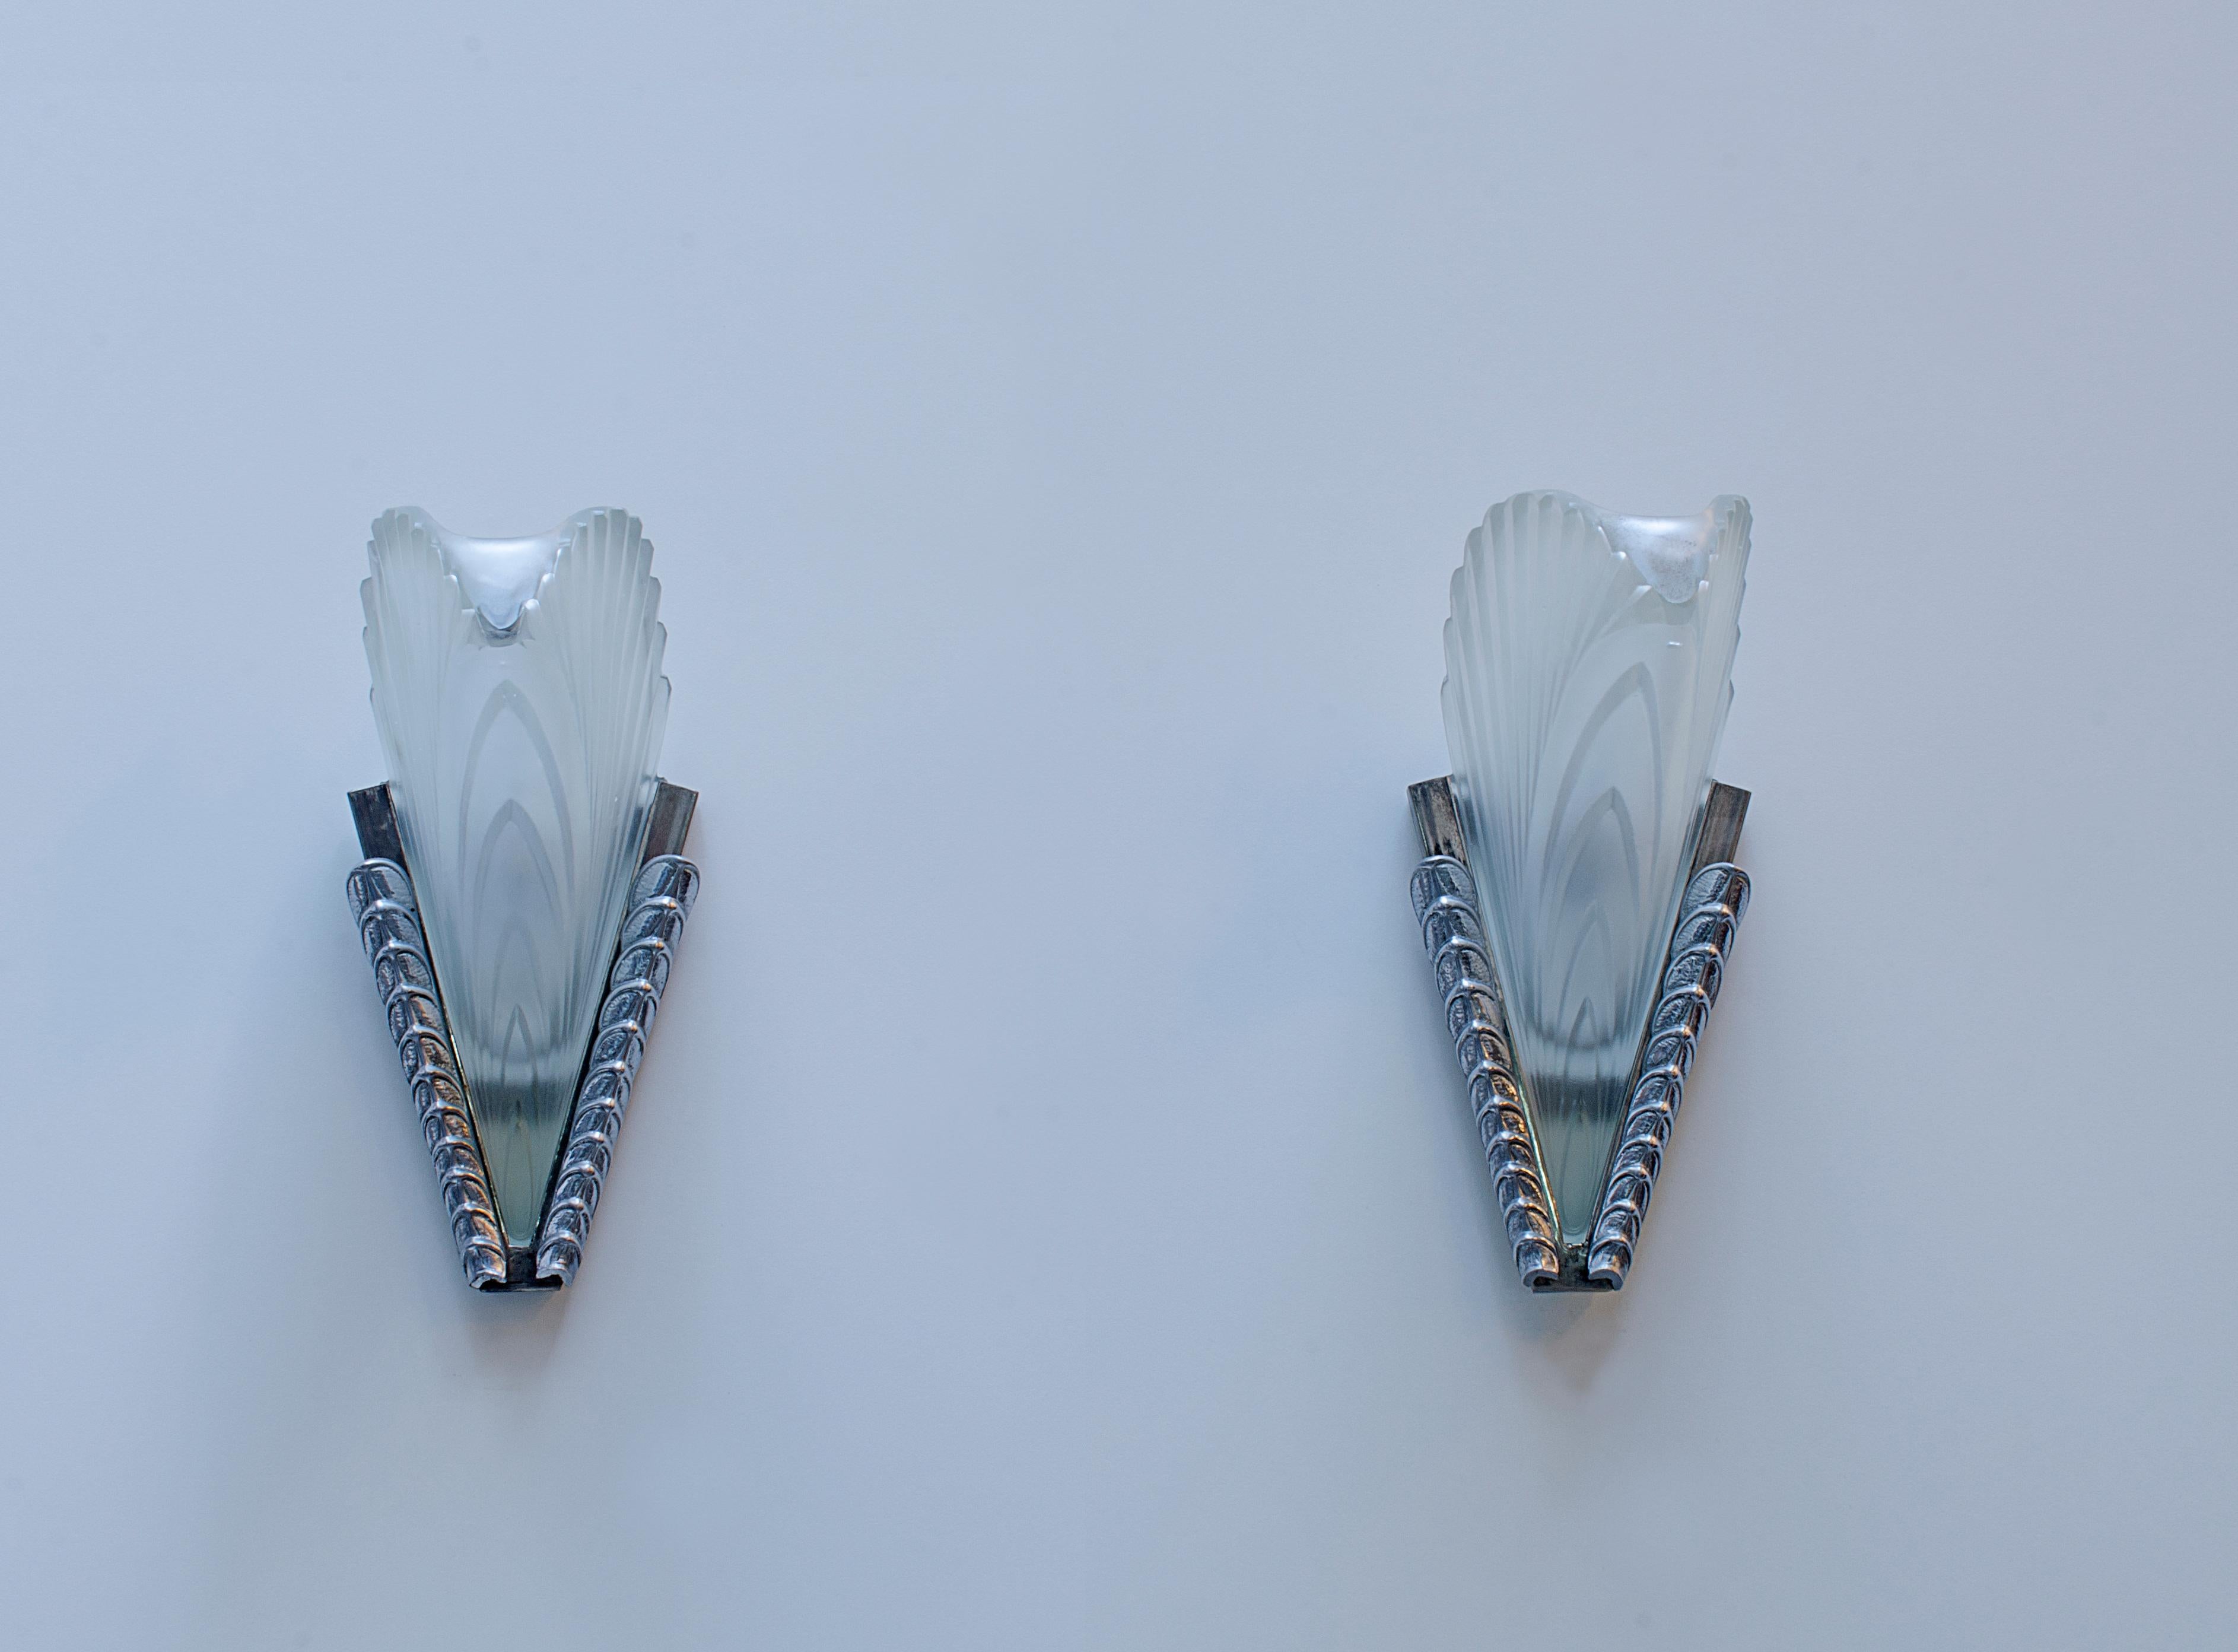 Pair of silver-plated bronze sconces, with satin glass plates in the shape of a feather, Attributed to Freres Simonet (1919-1970)

France, circa 1920.